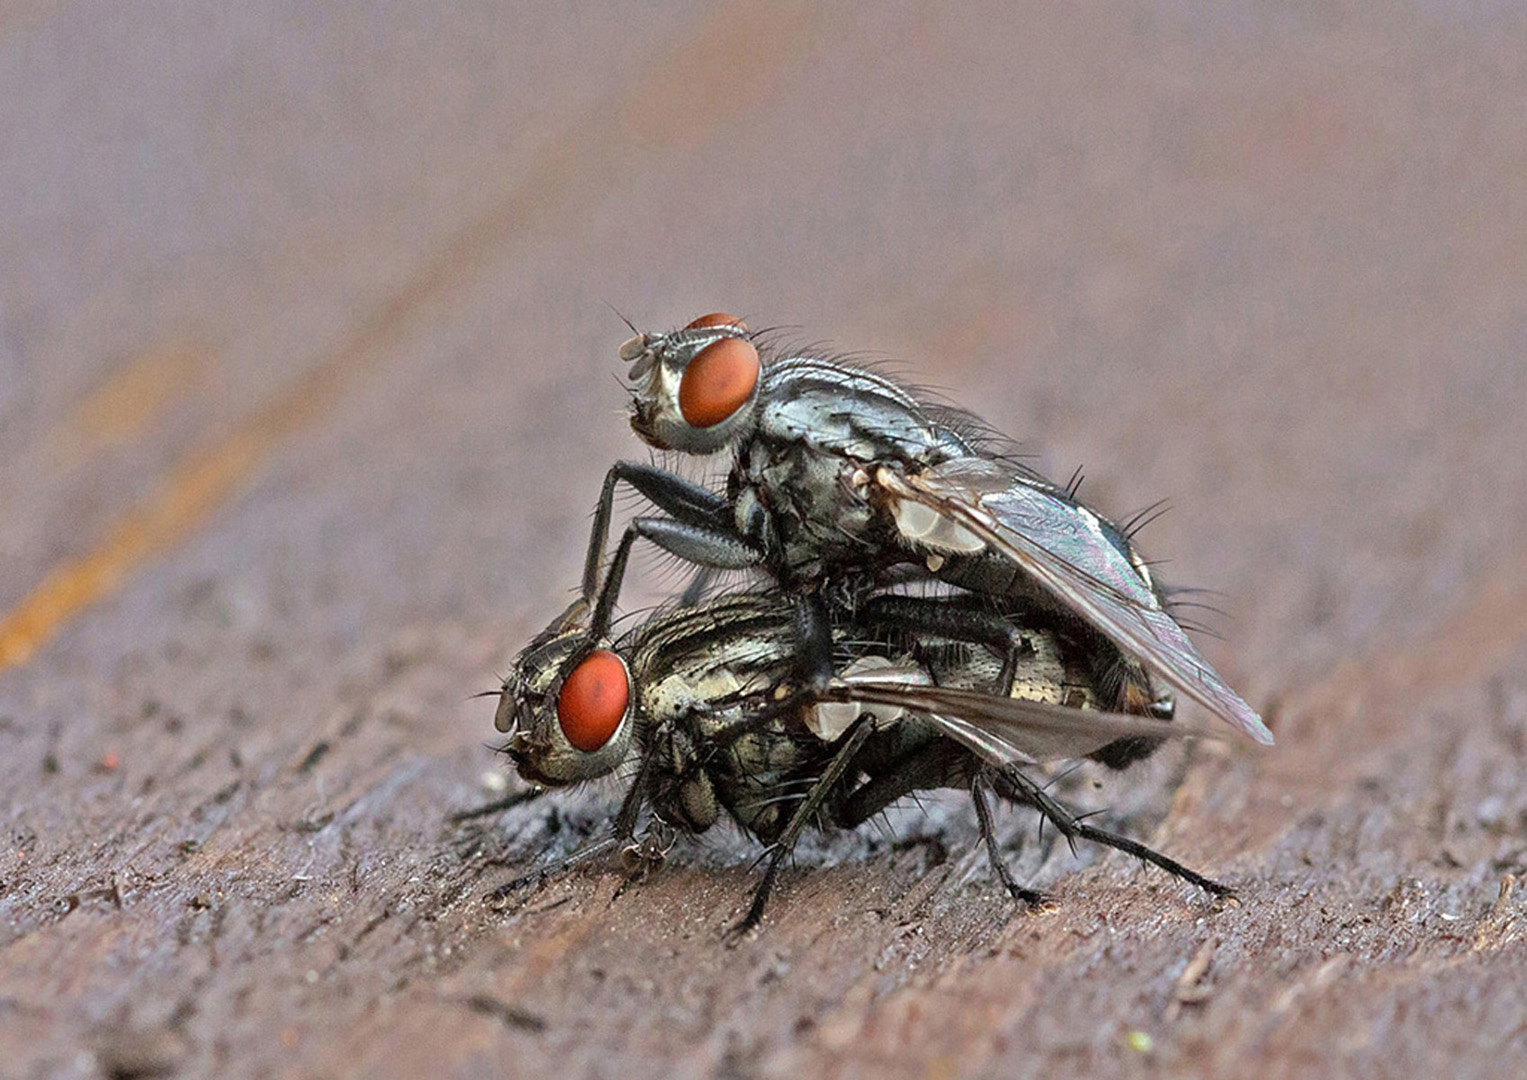 Flies are together (Reijo Hovilainen)